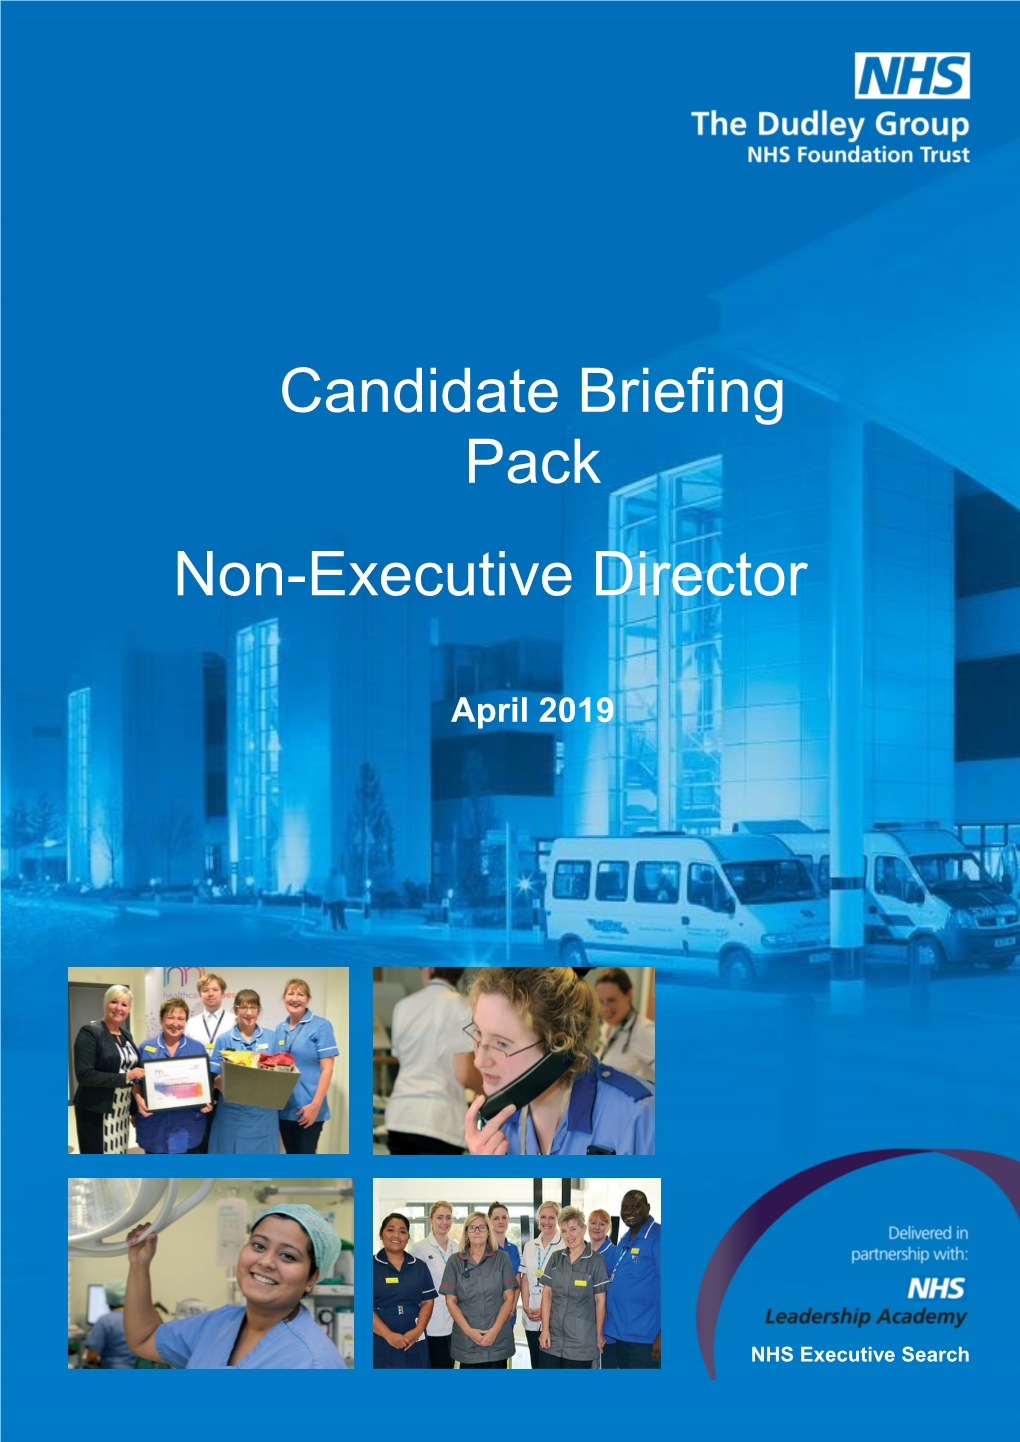 Candidate Briefing Pack Non-Executive Director